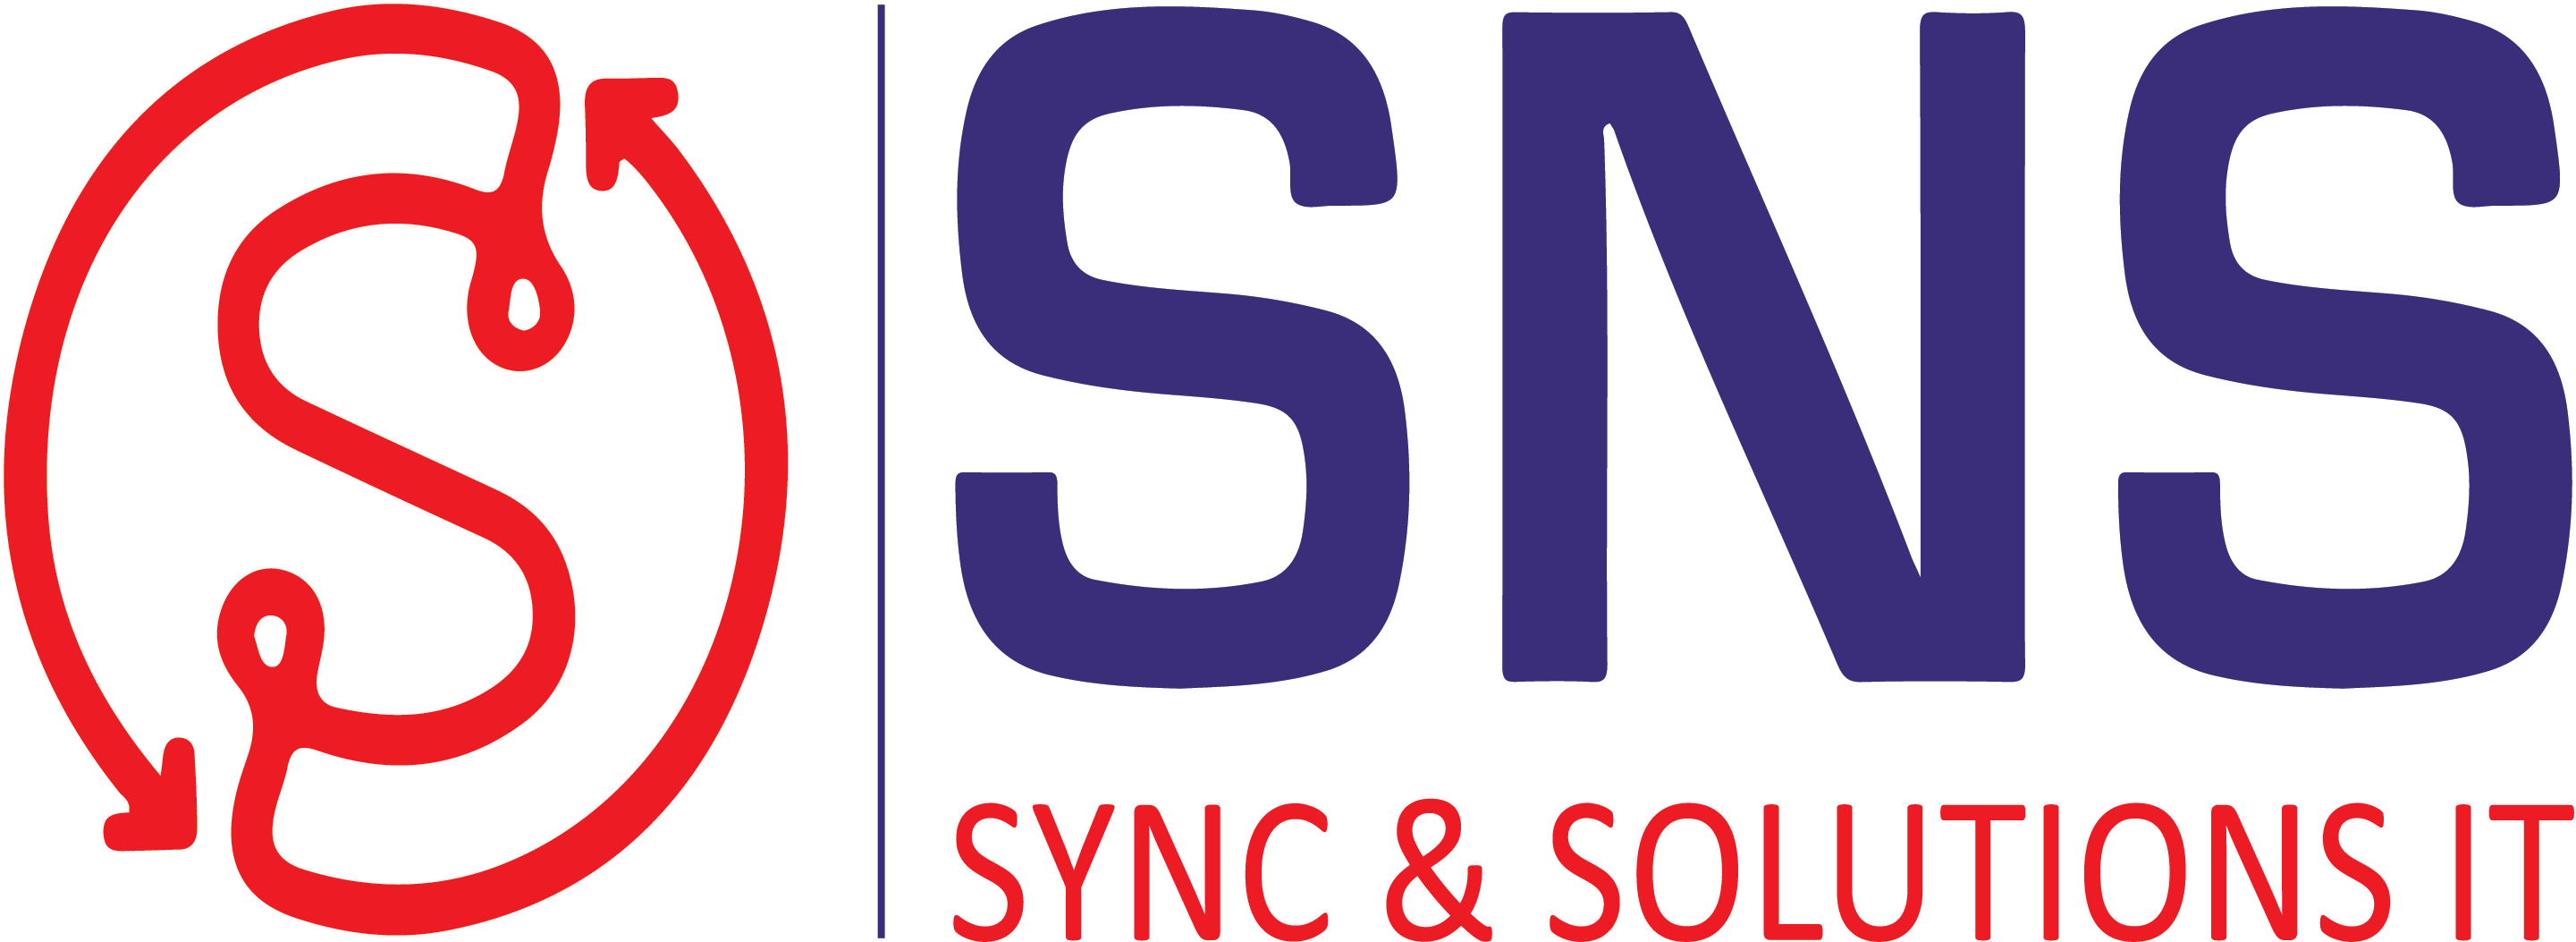 Sync & Solutions IT